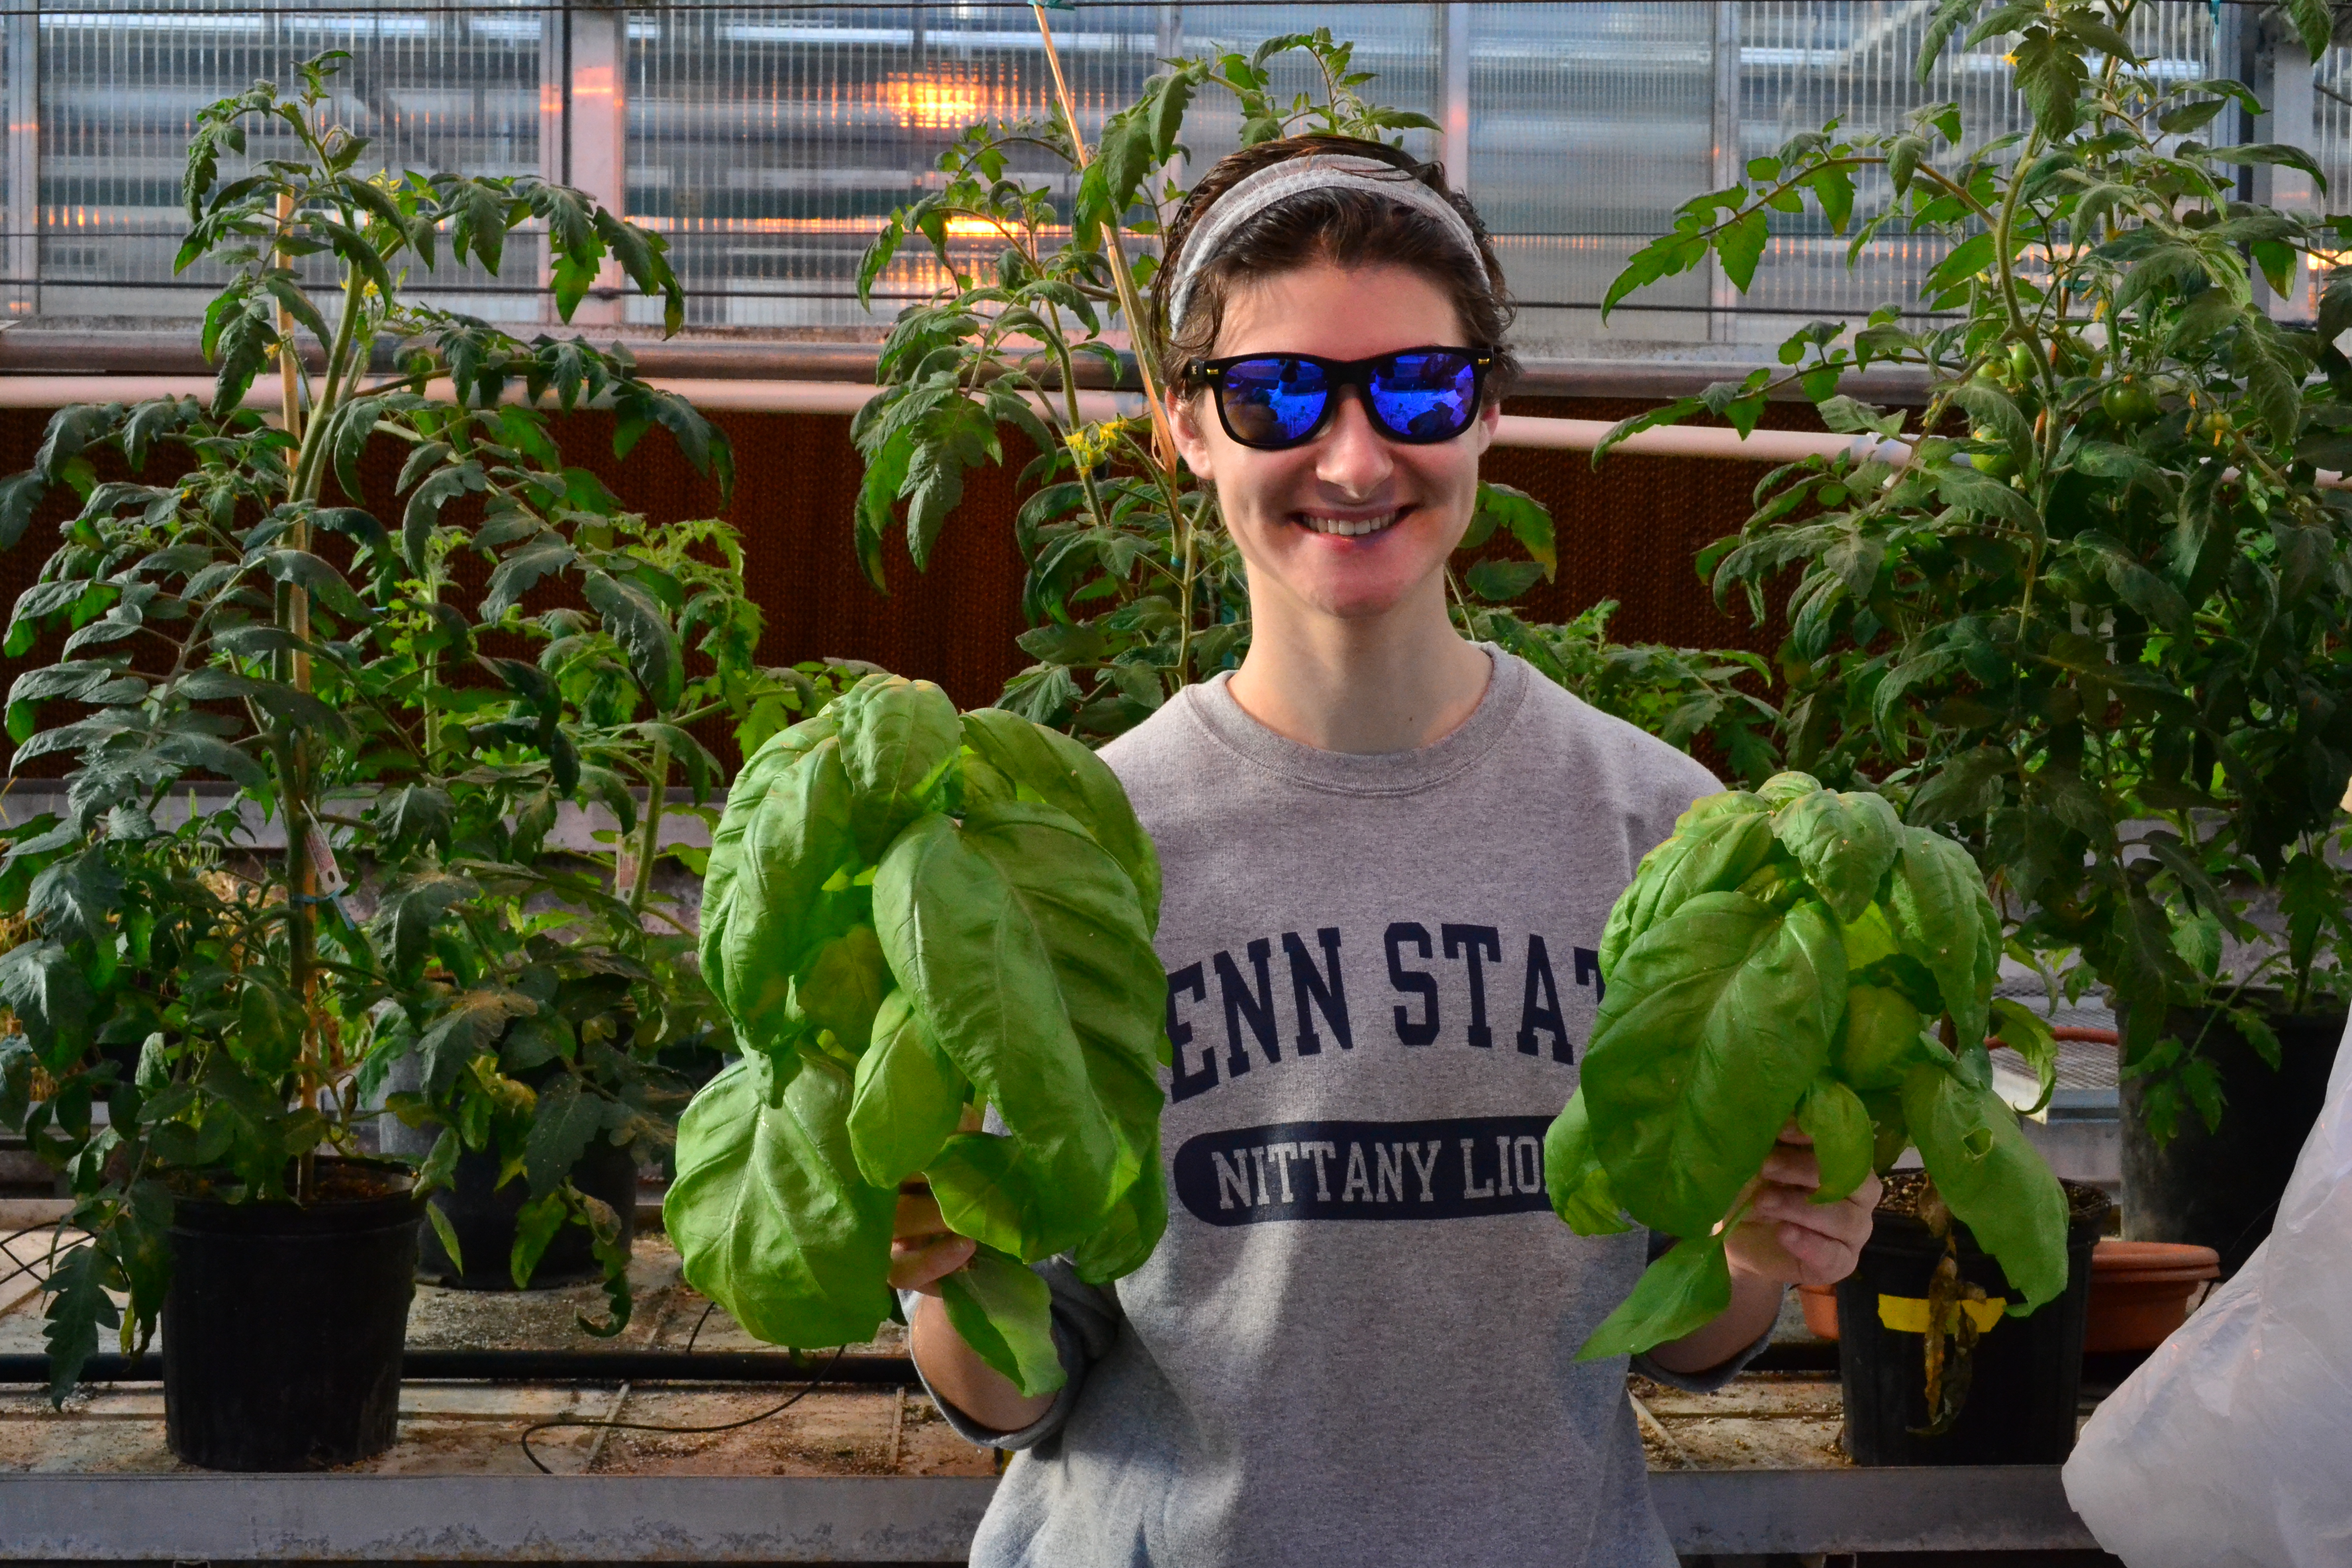 Student Farm Club members harvested and bagged whole basil plants. Check out the size of the leaves!